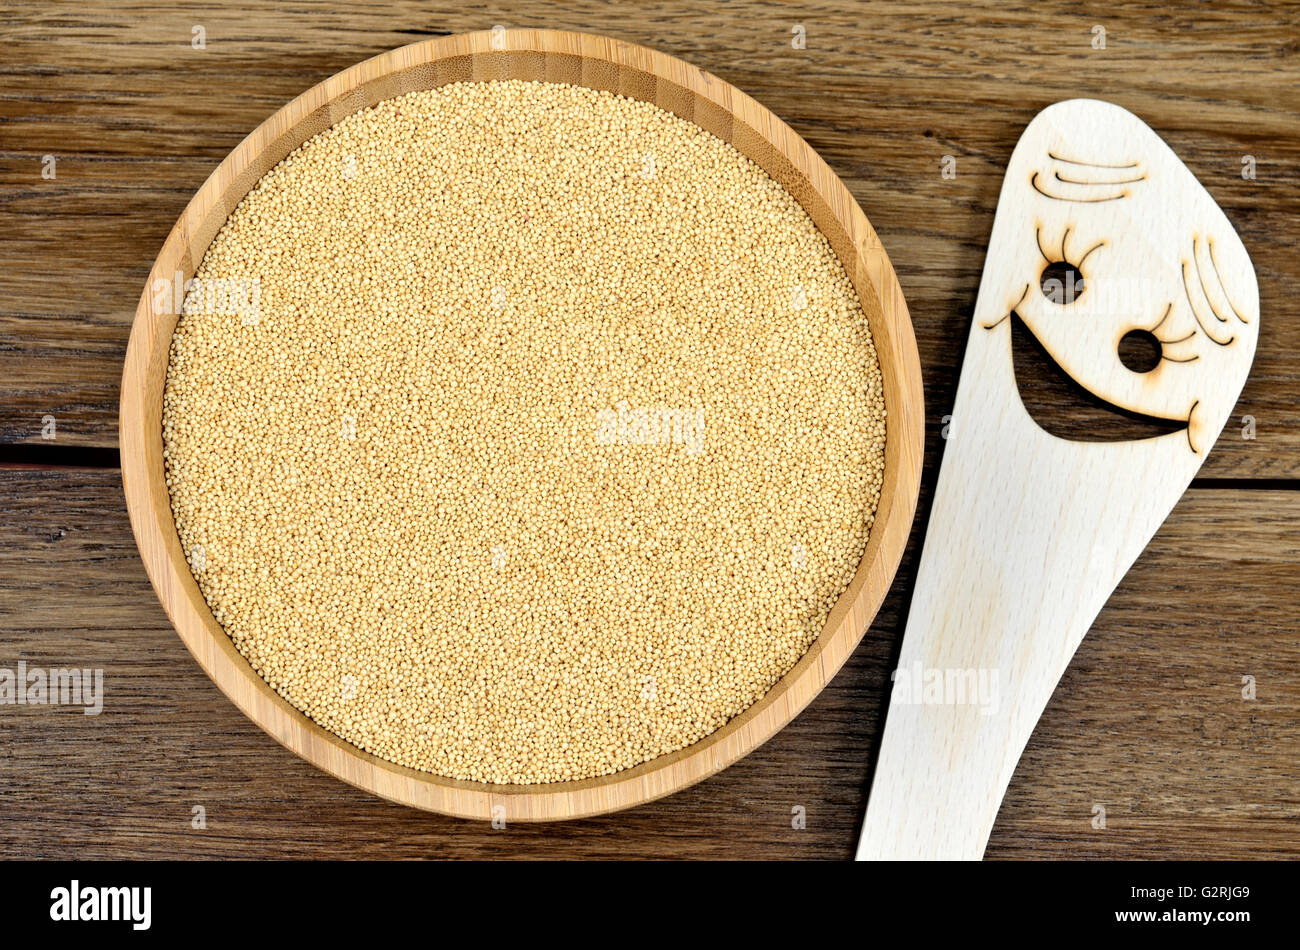 Wooden spoon with smile shape and amaranth seeds in a bamboo bowl Stock Photo